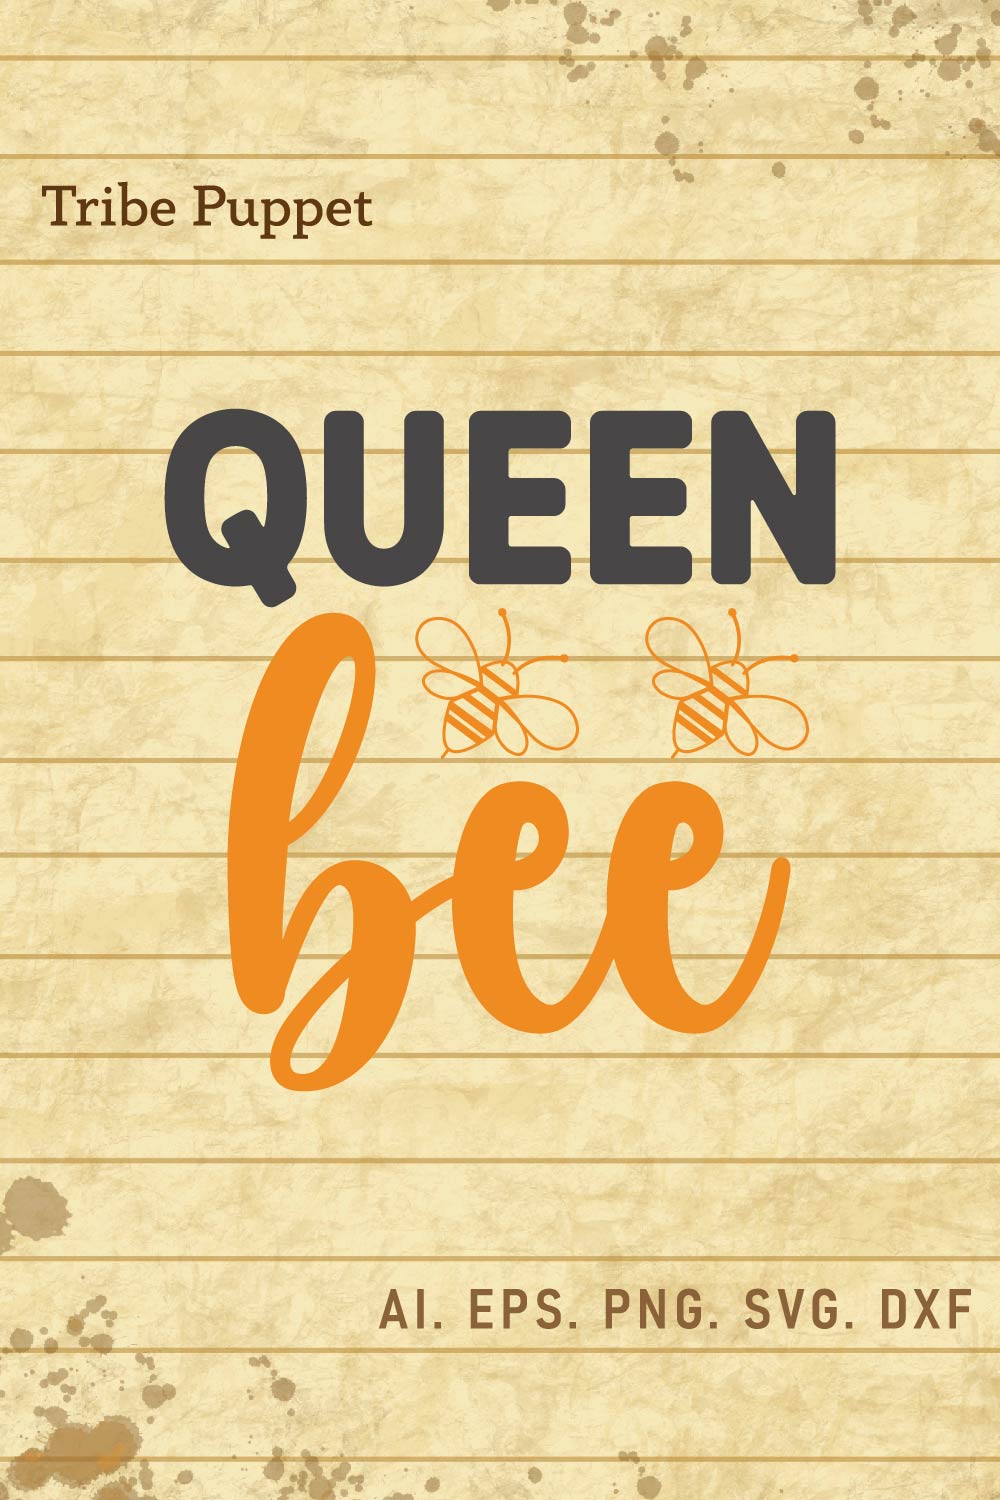 Bee Quotes pinterest preview image.